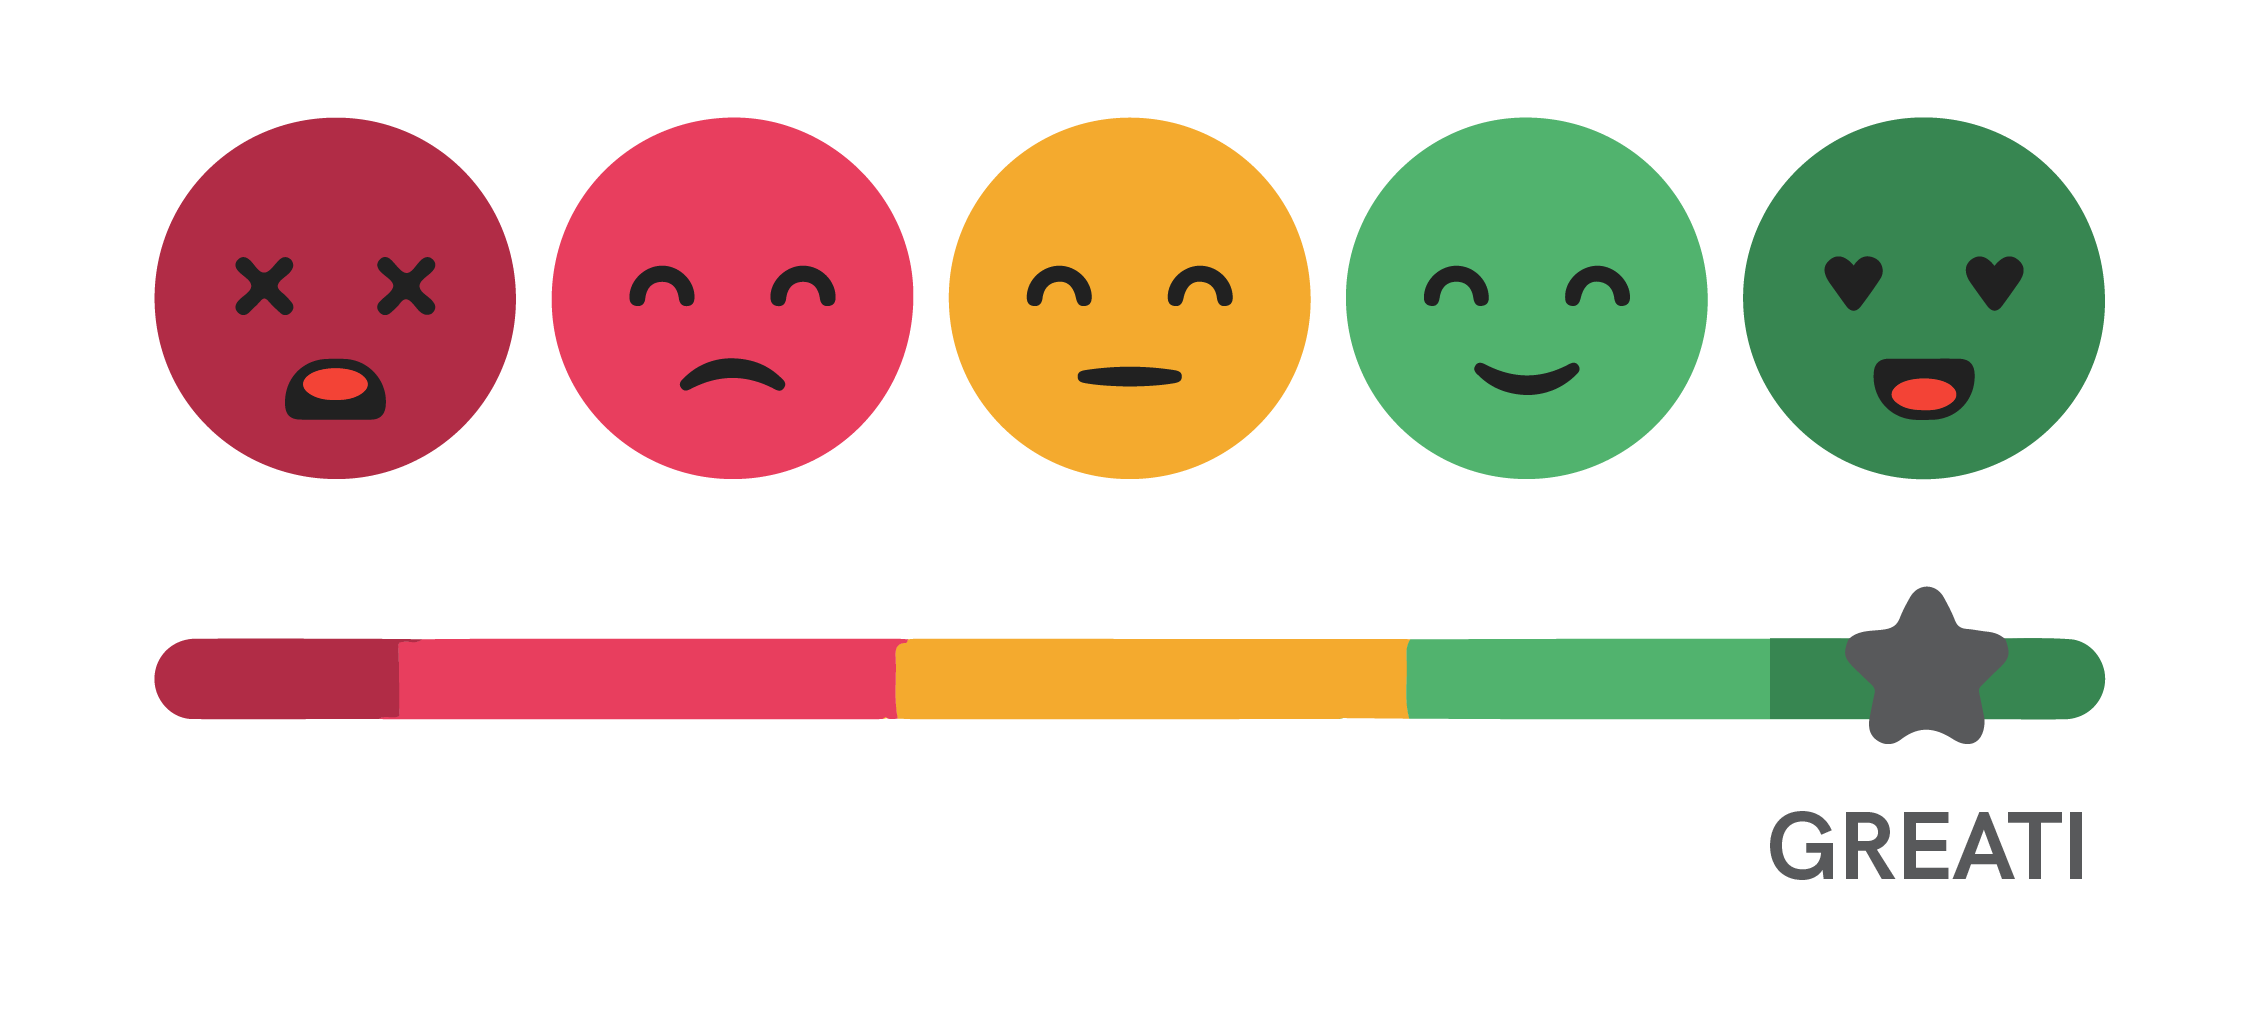 A depiction of the customer satisfaction scale using emoji faces, ranging from poor to excellent